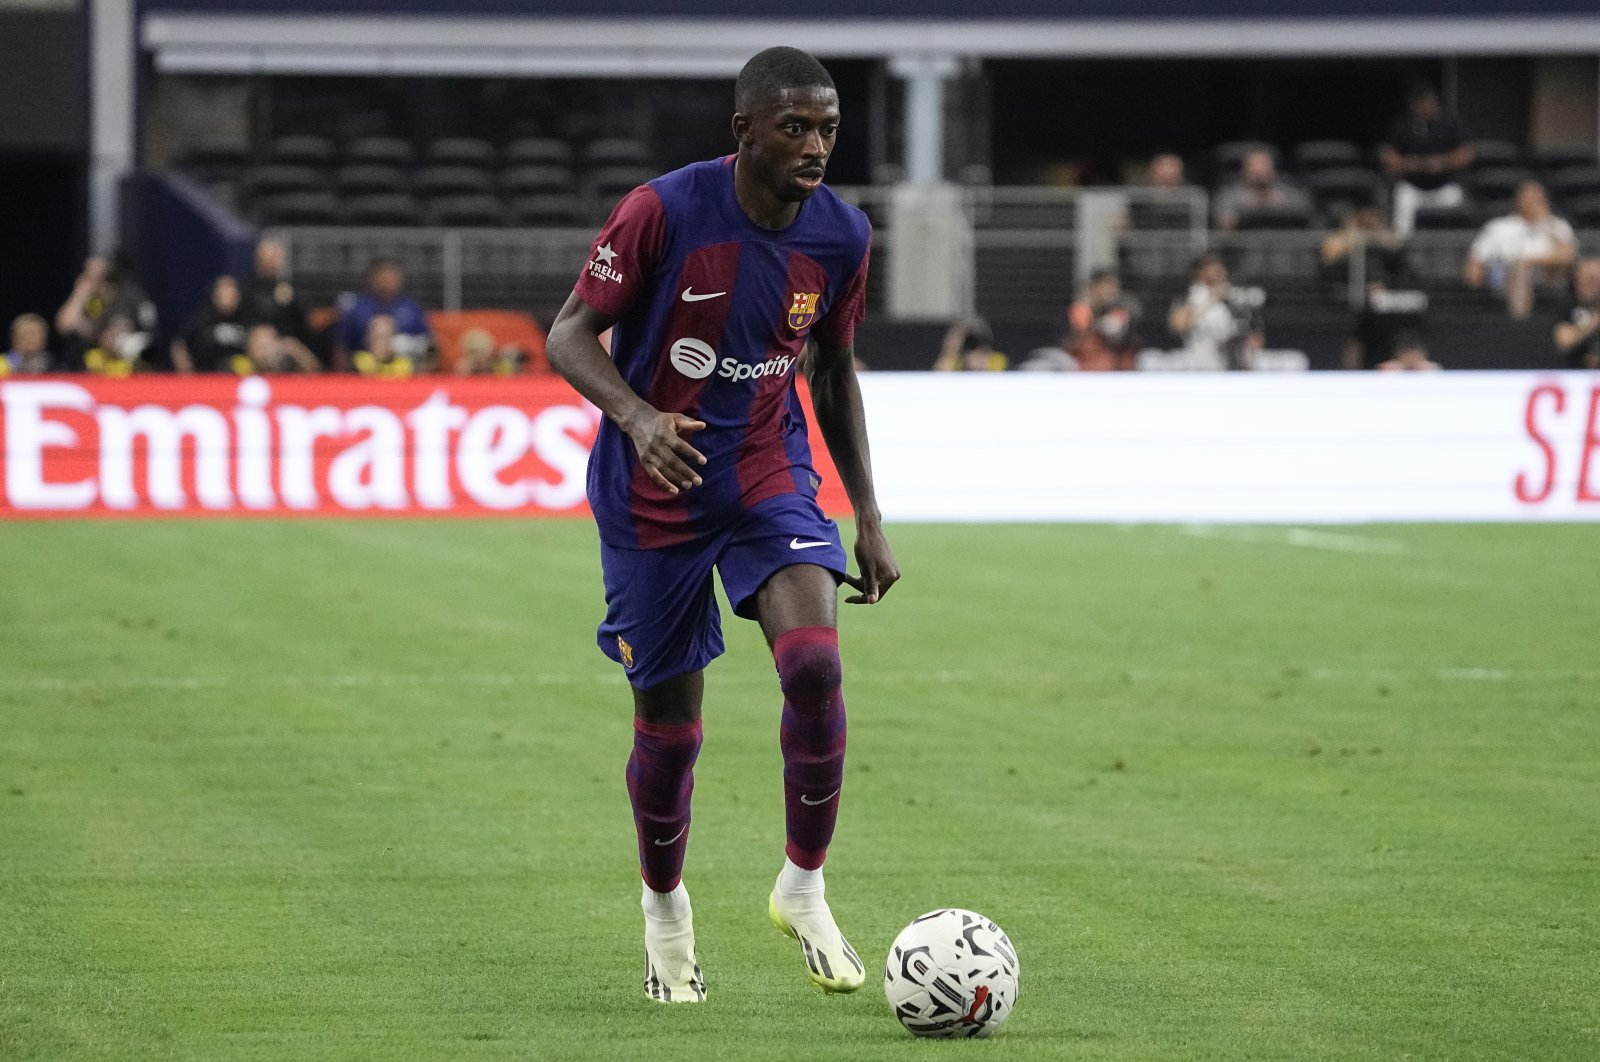 Barcelona’s Xavi confirms Dembele’s imminent departure to PSG